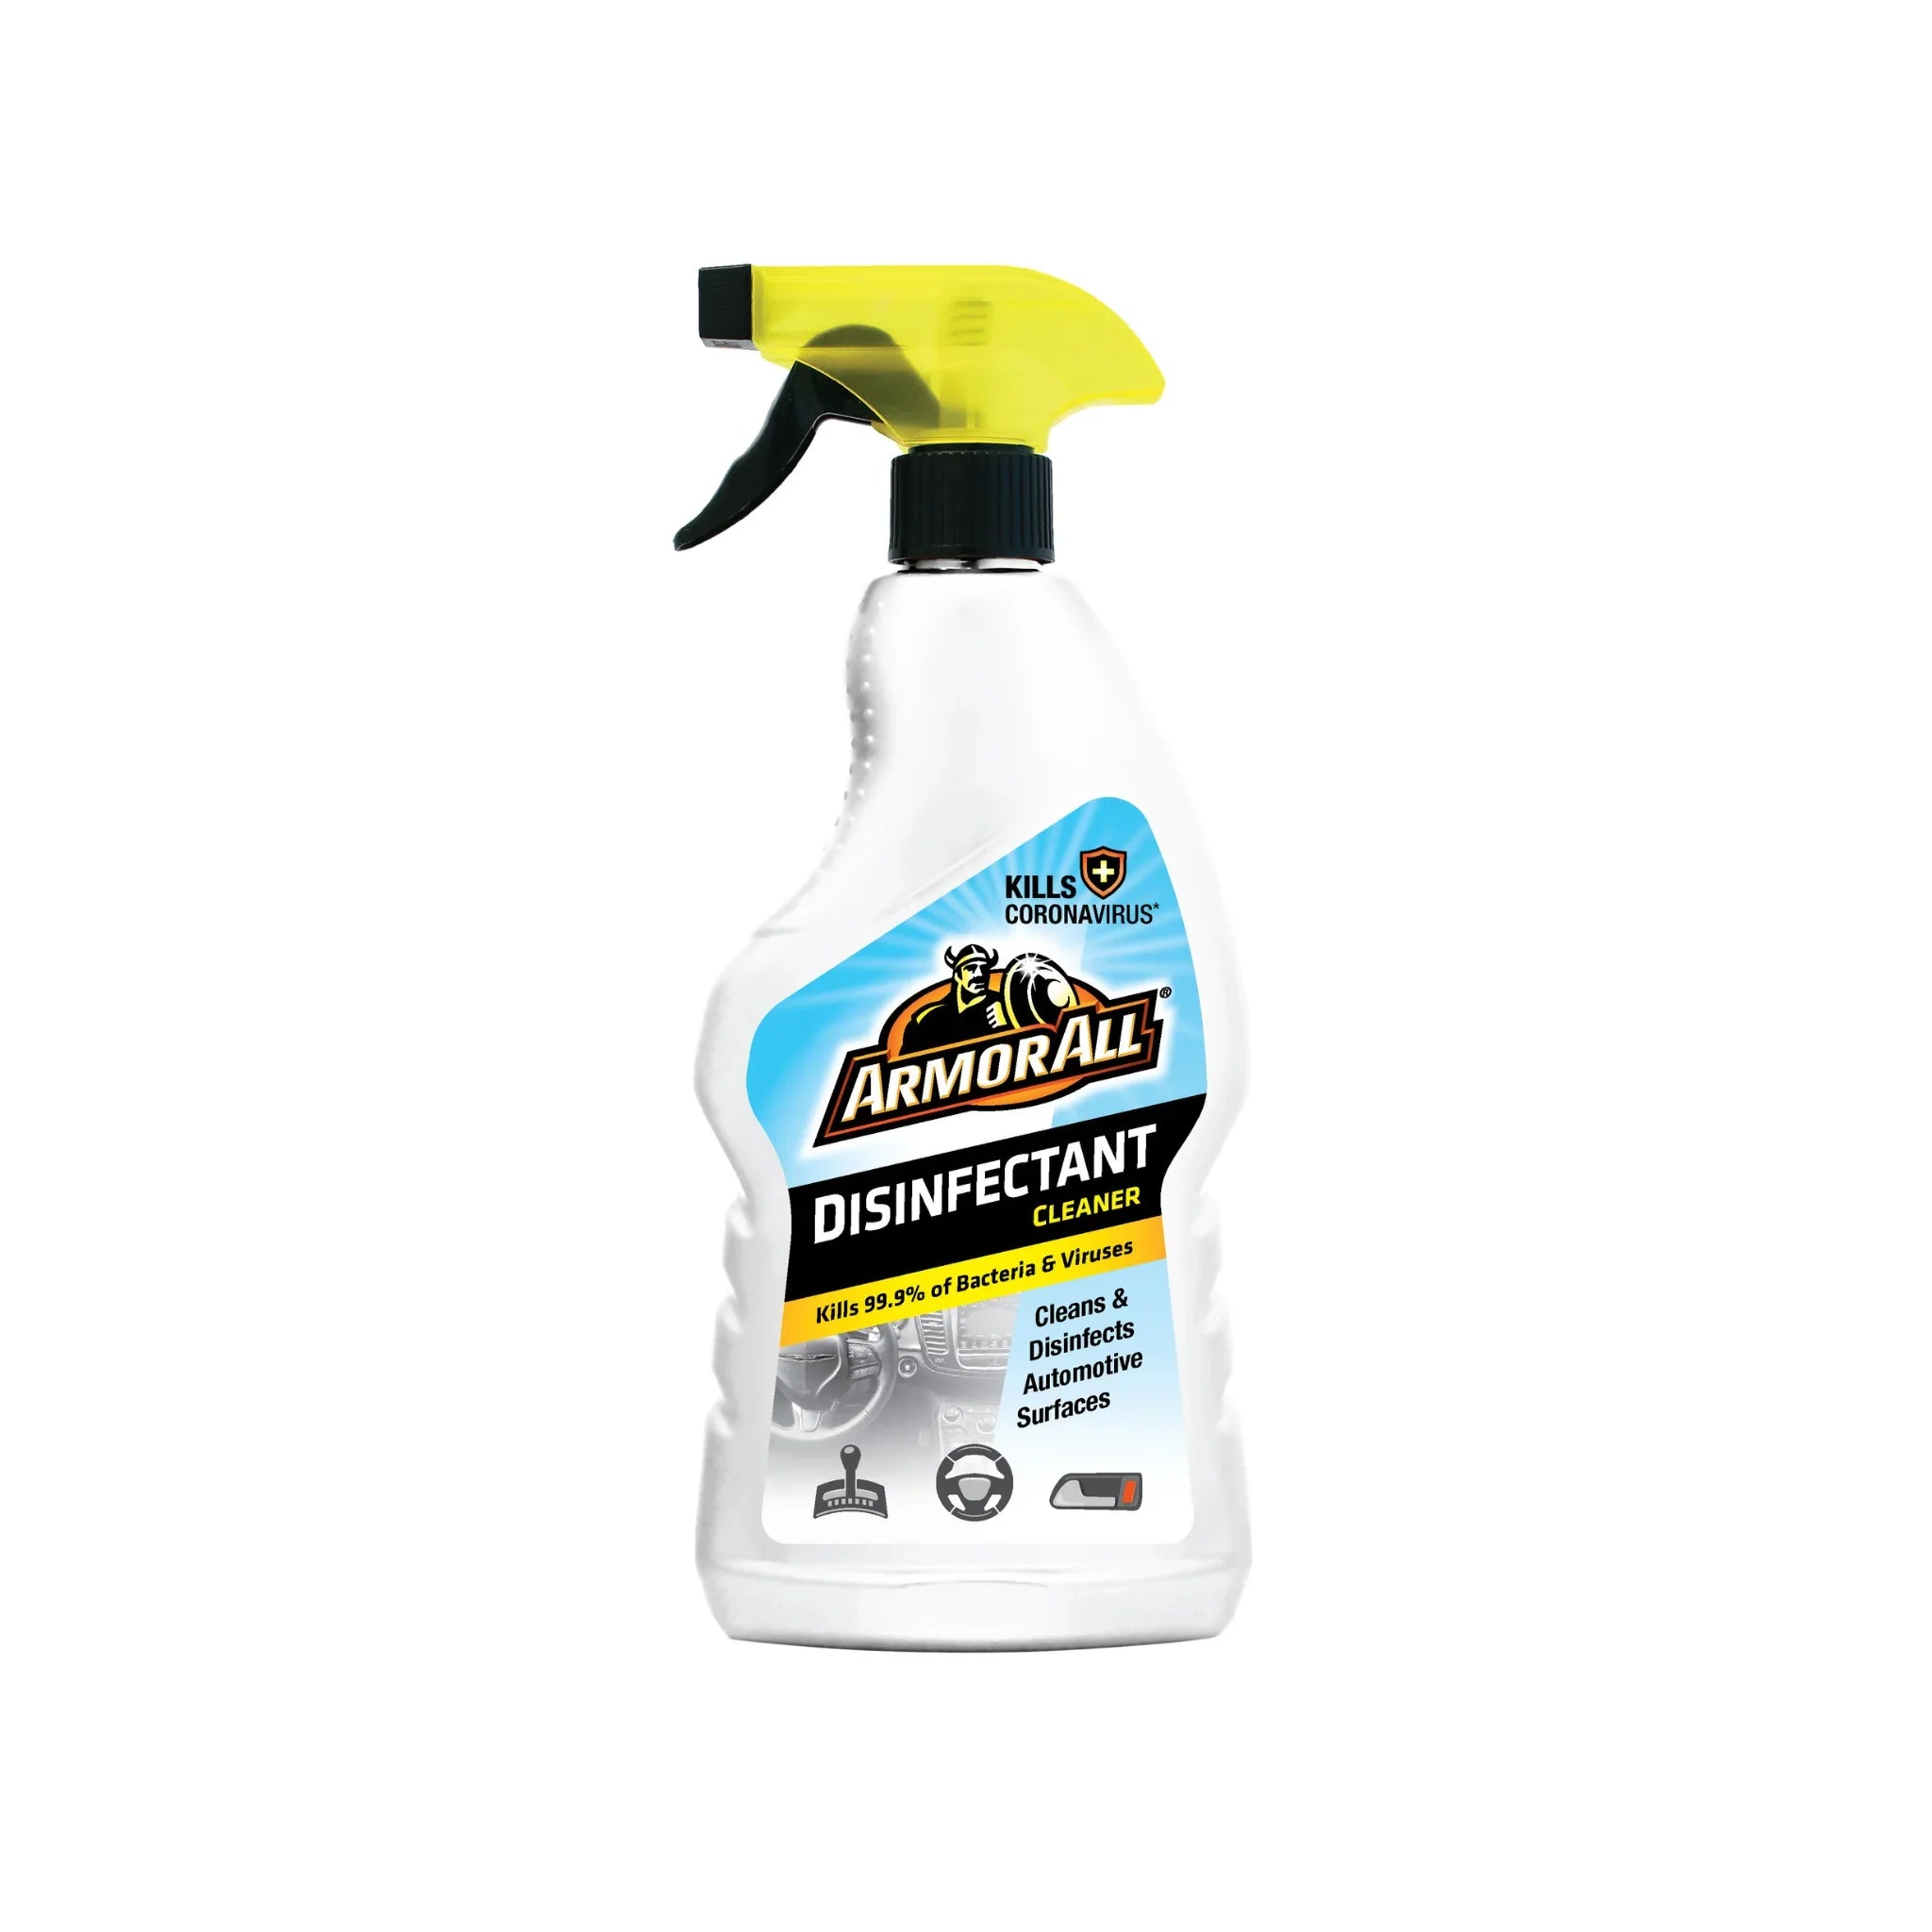 ArmorAll Disinfectant Cleaner 500ml